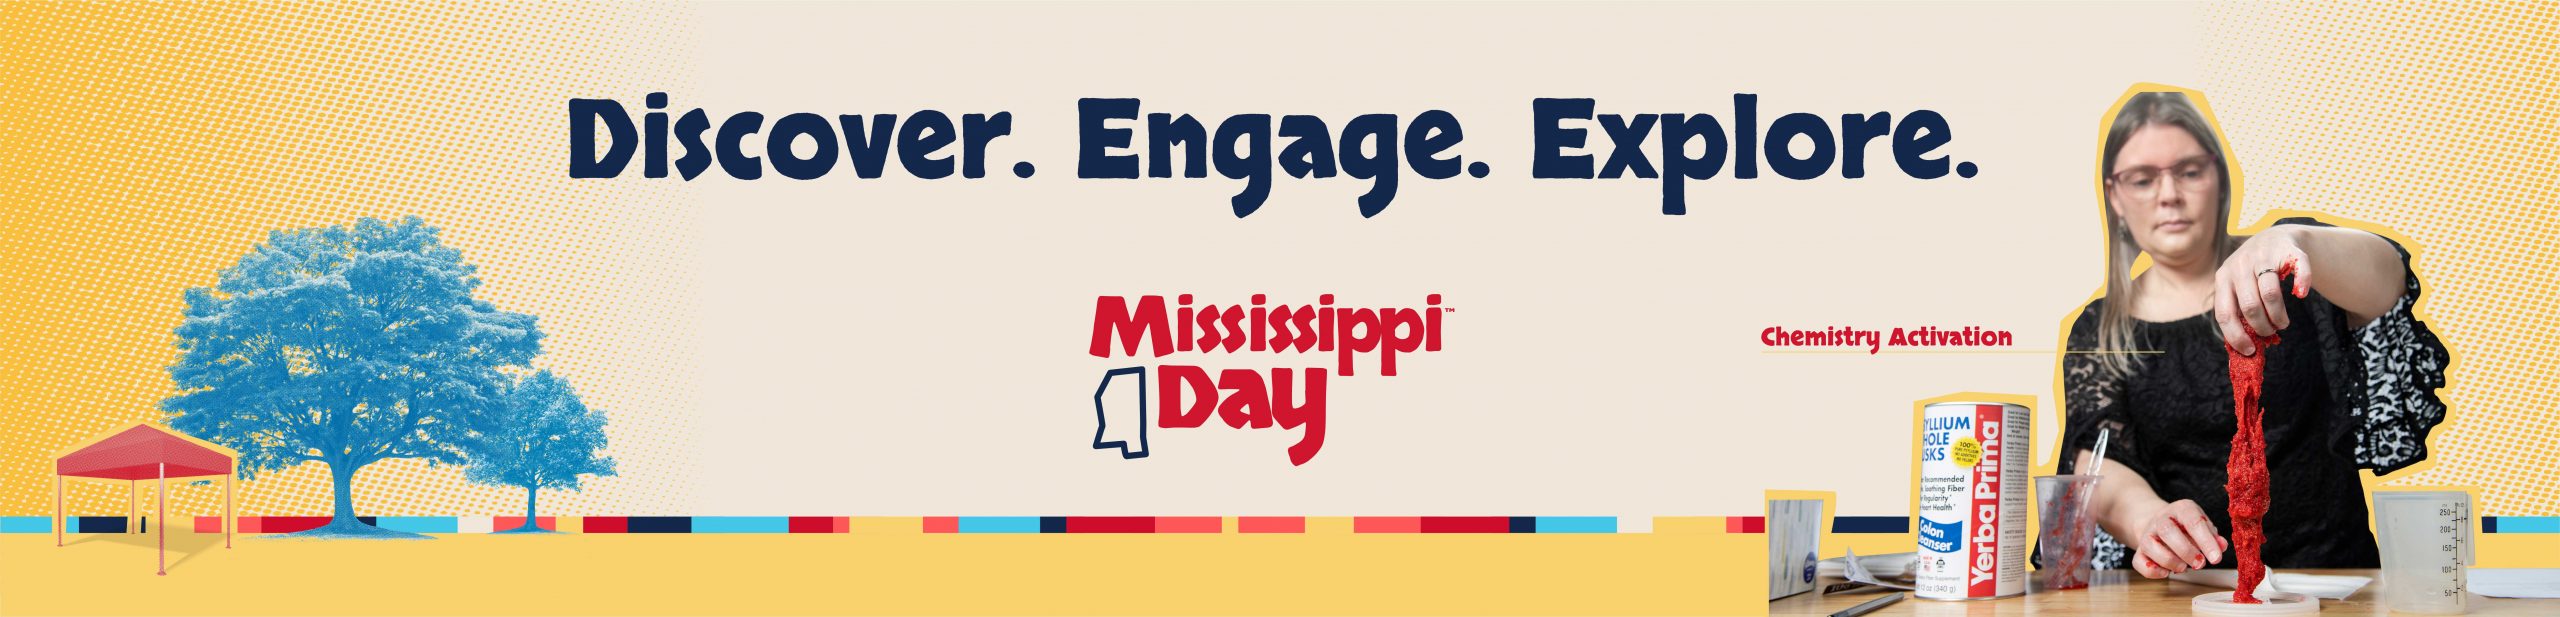 Discover. Engage. Explore. Mississippi Day. Faculty conducting a chemistry activation.